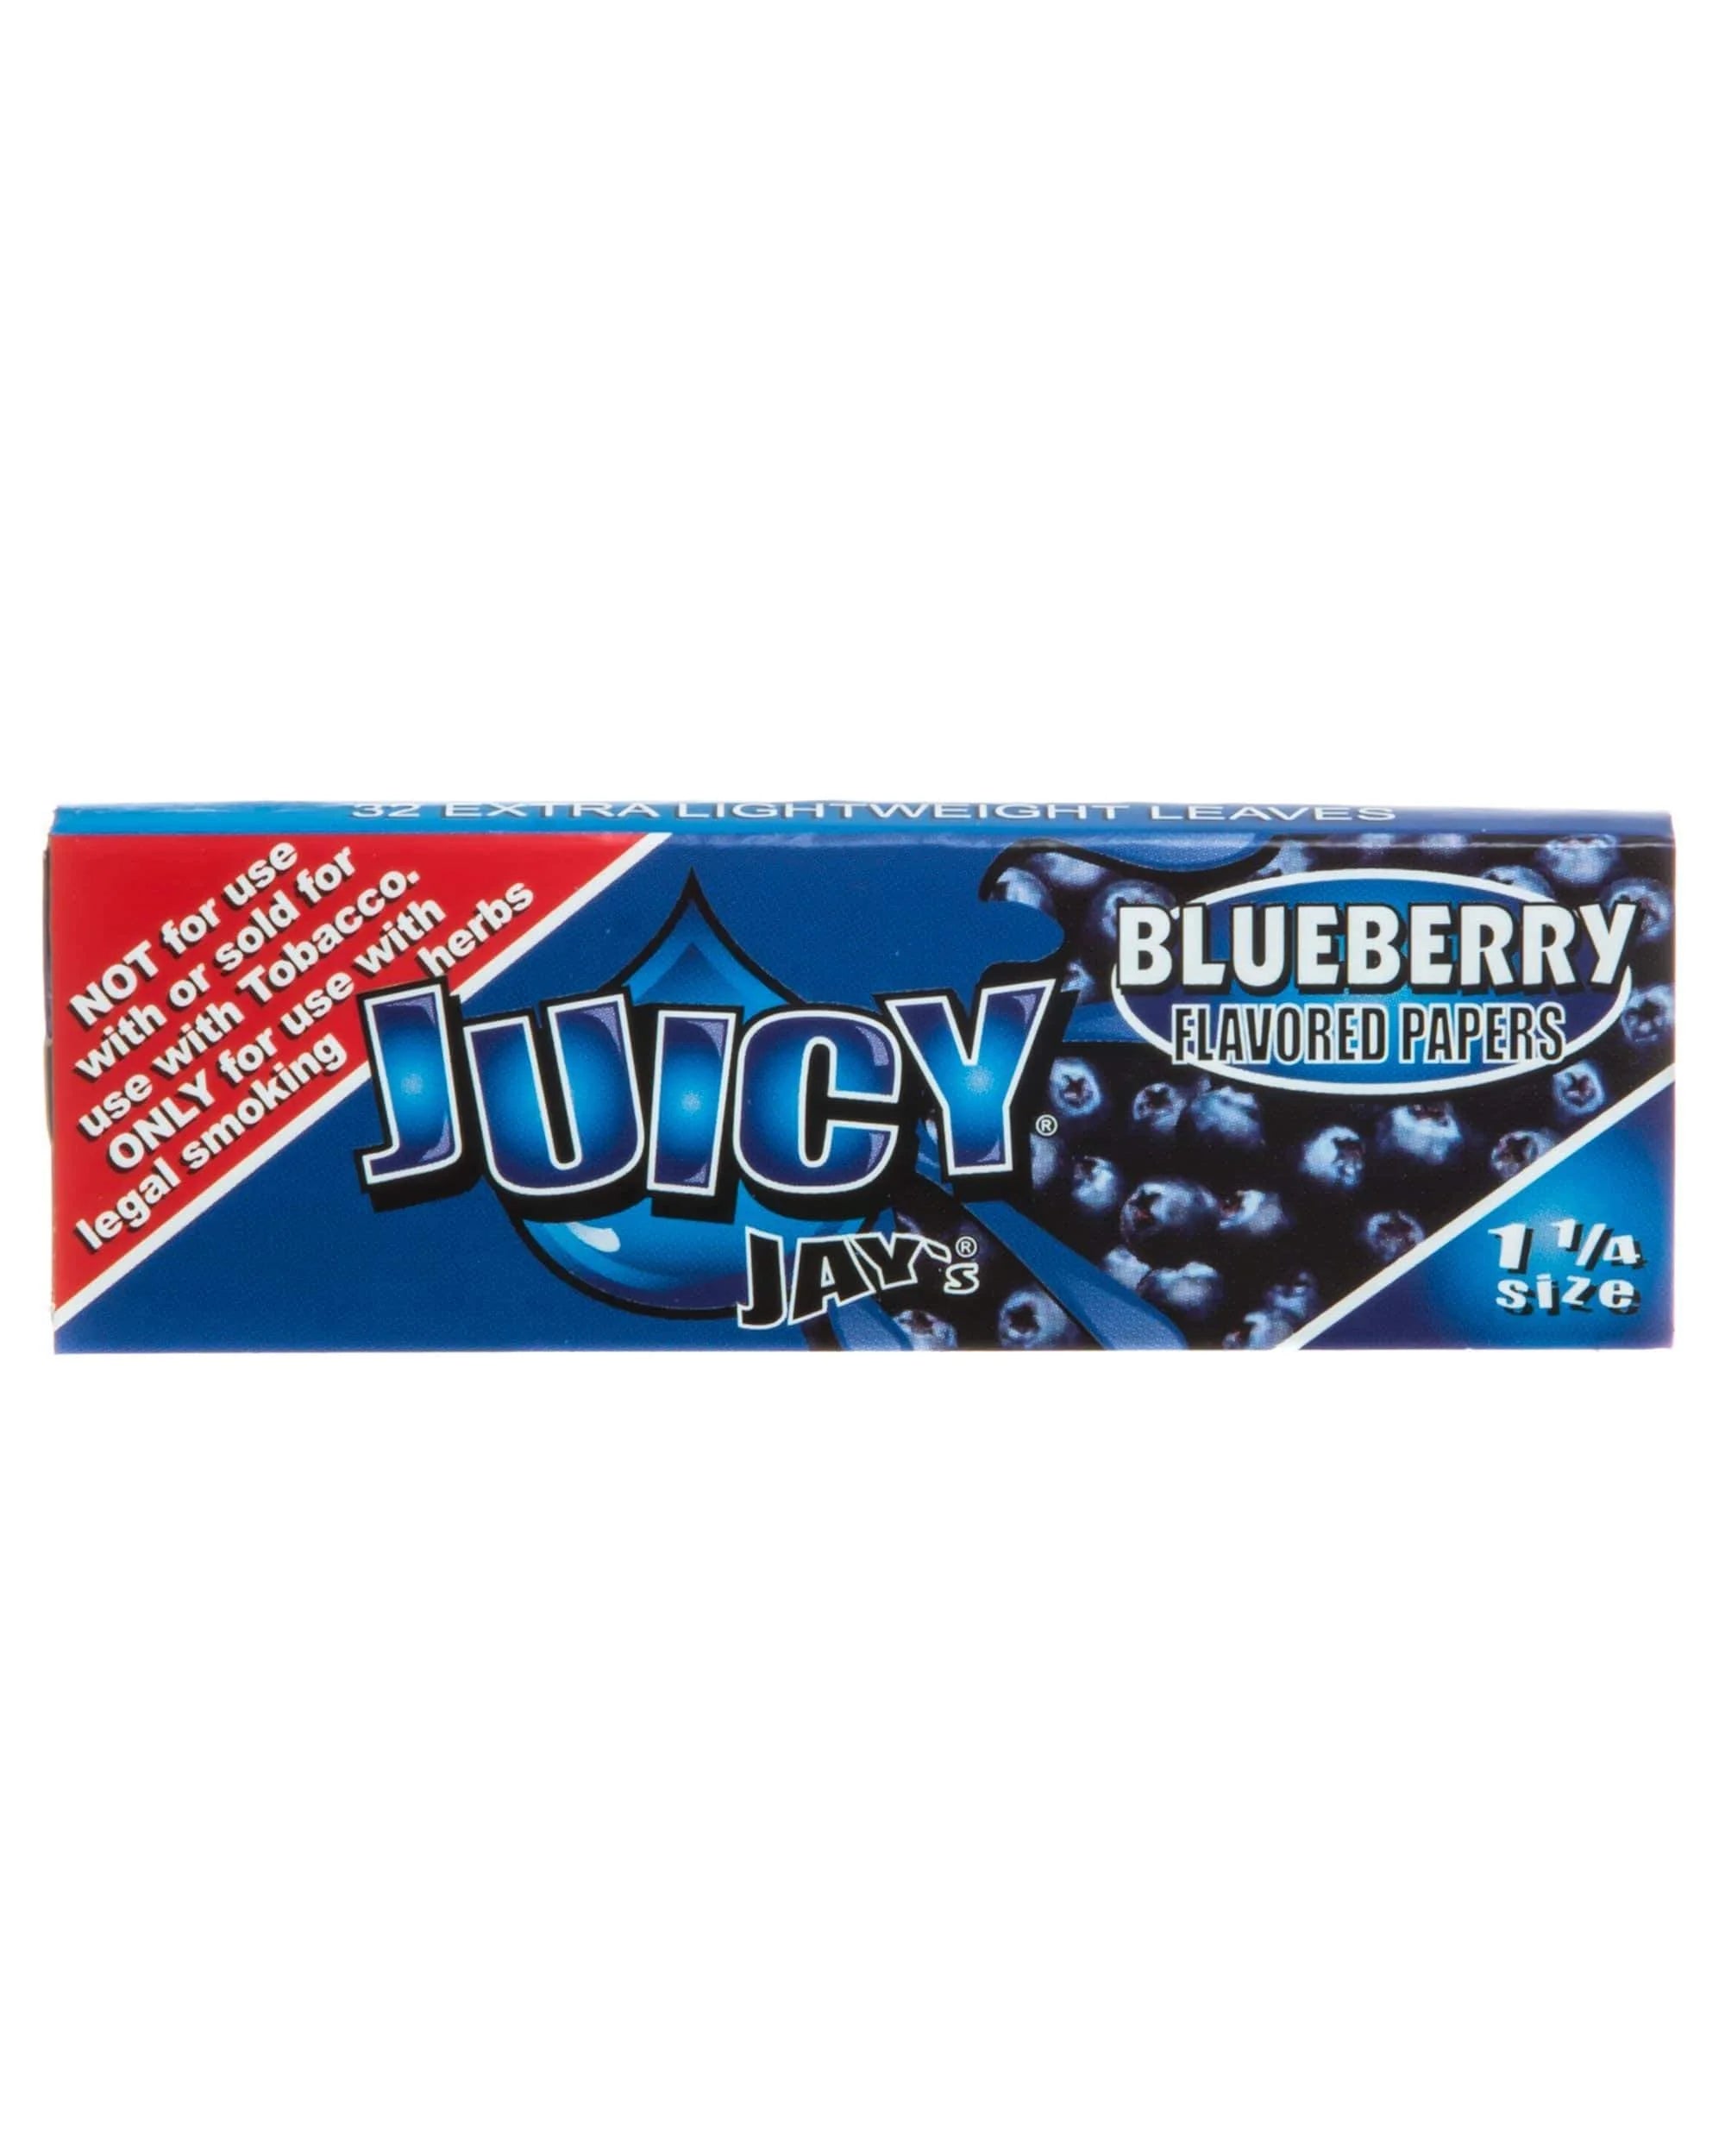 Juicy Jay Papers Blueberry 1 1/4